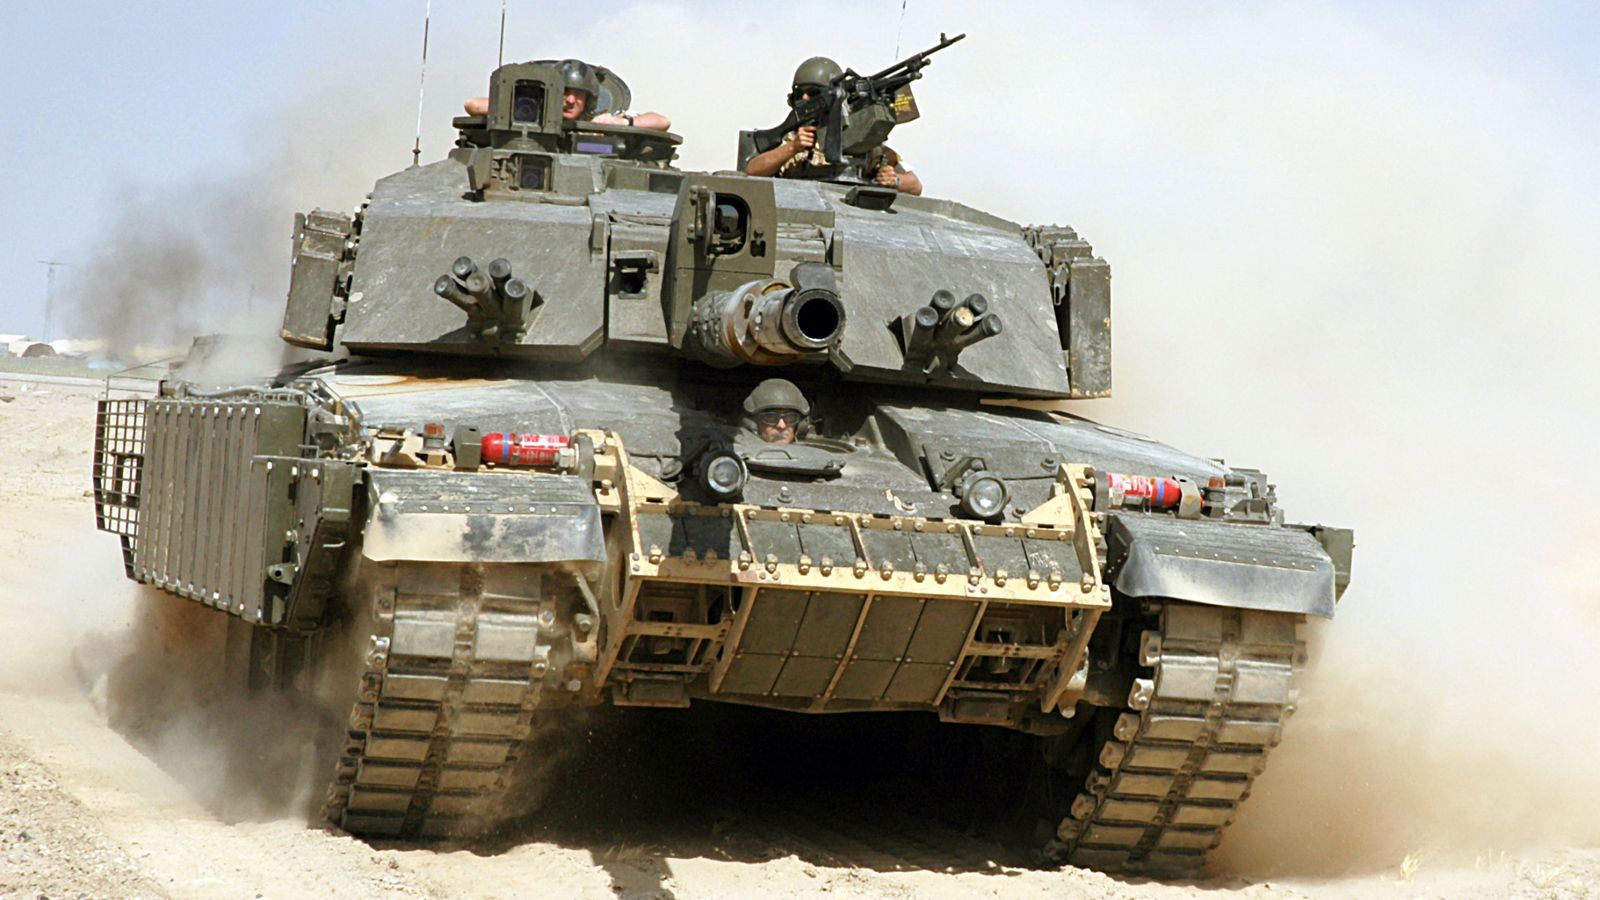 British tanks expected to arrive in Ukraine by March